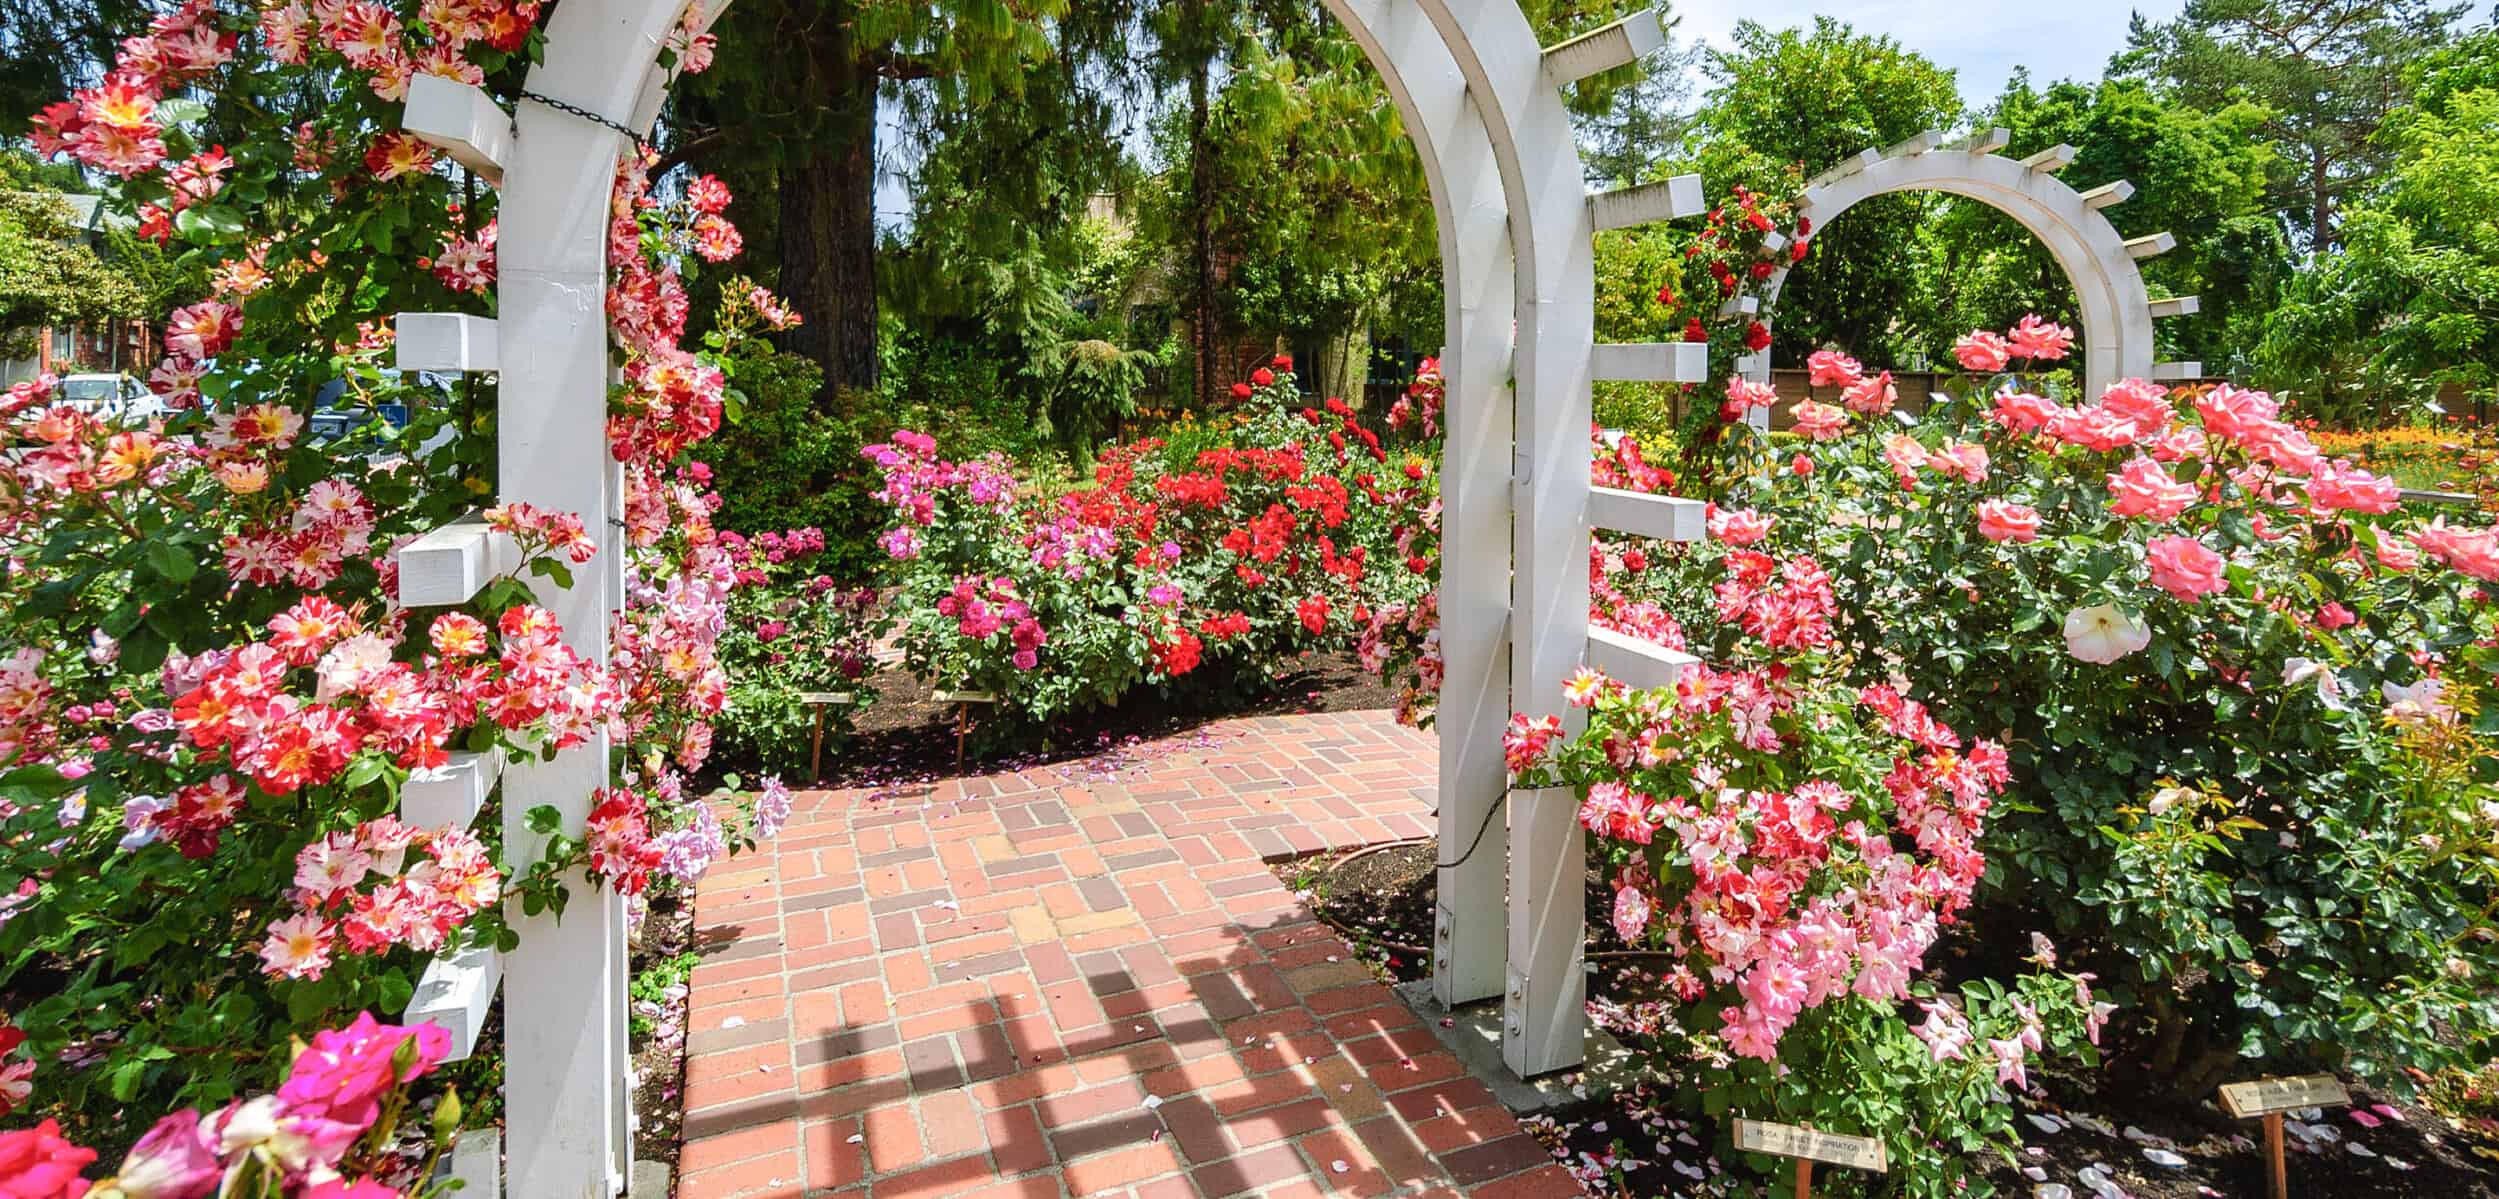 Luther Burbank Home and Gardens roses